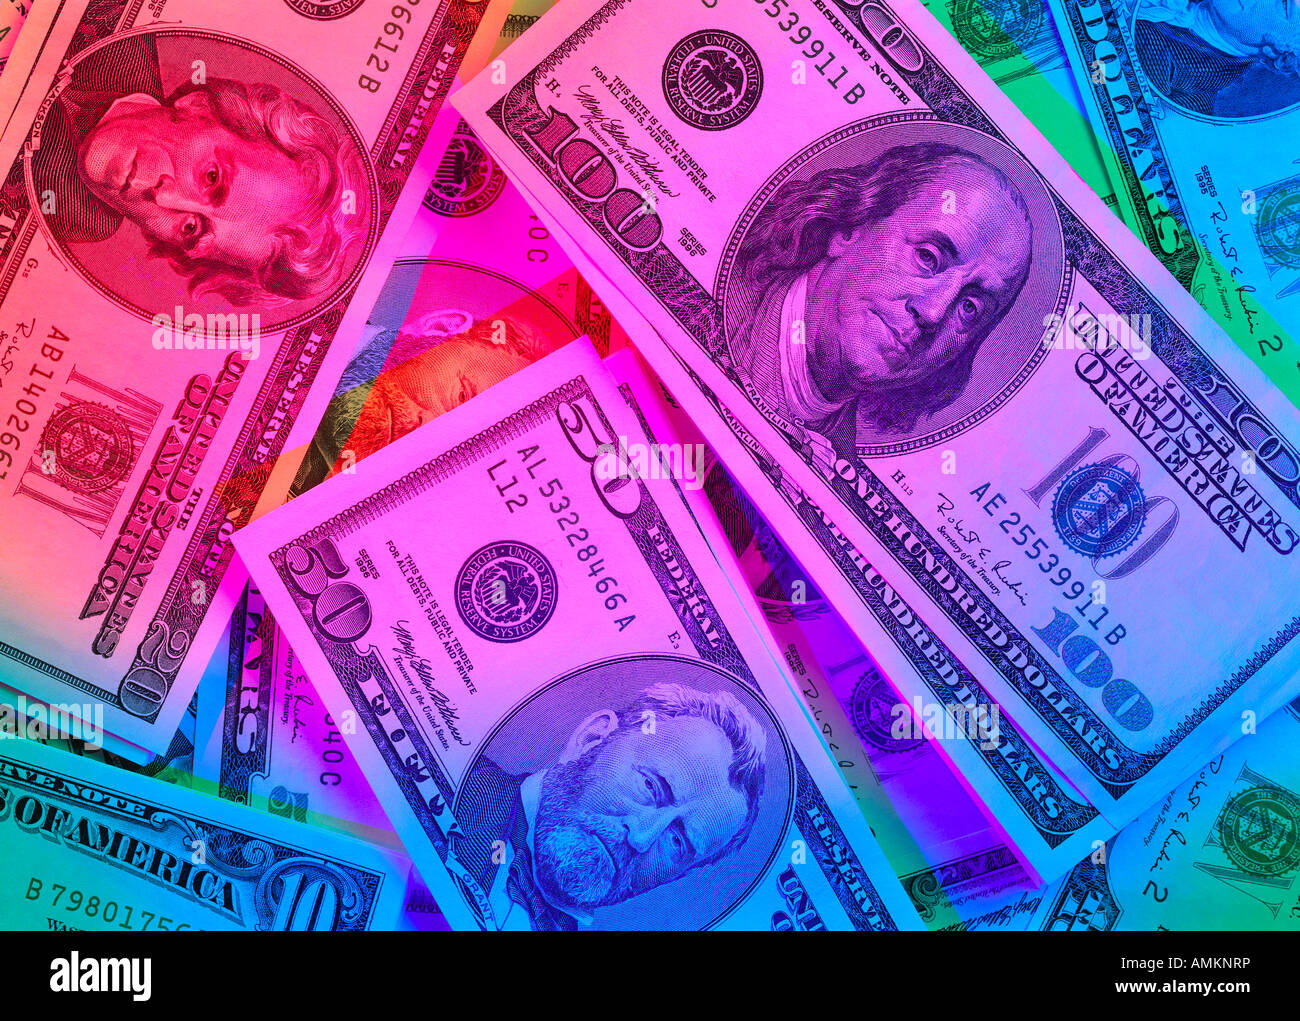 American banknotes in colored light Stock Photo